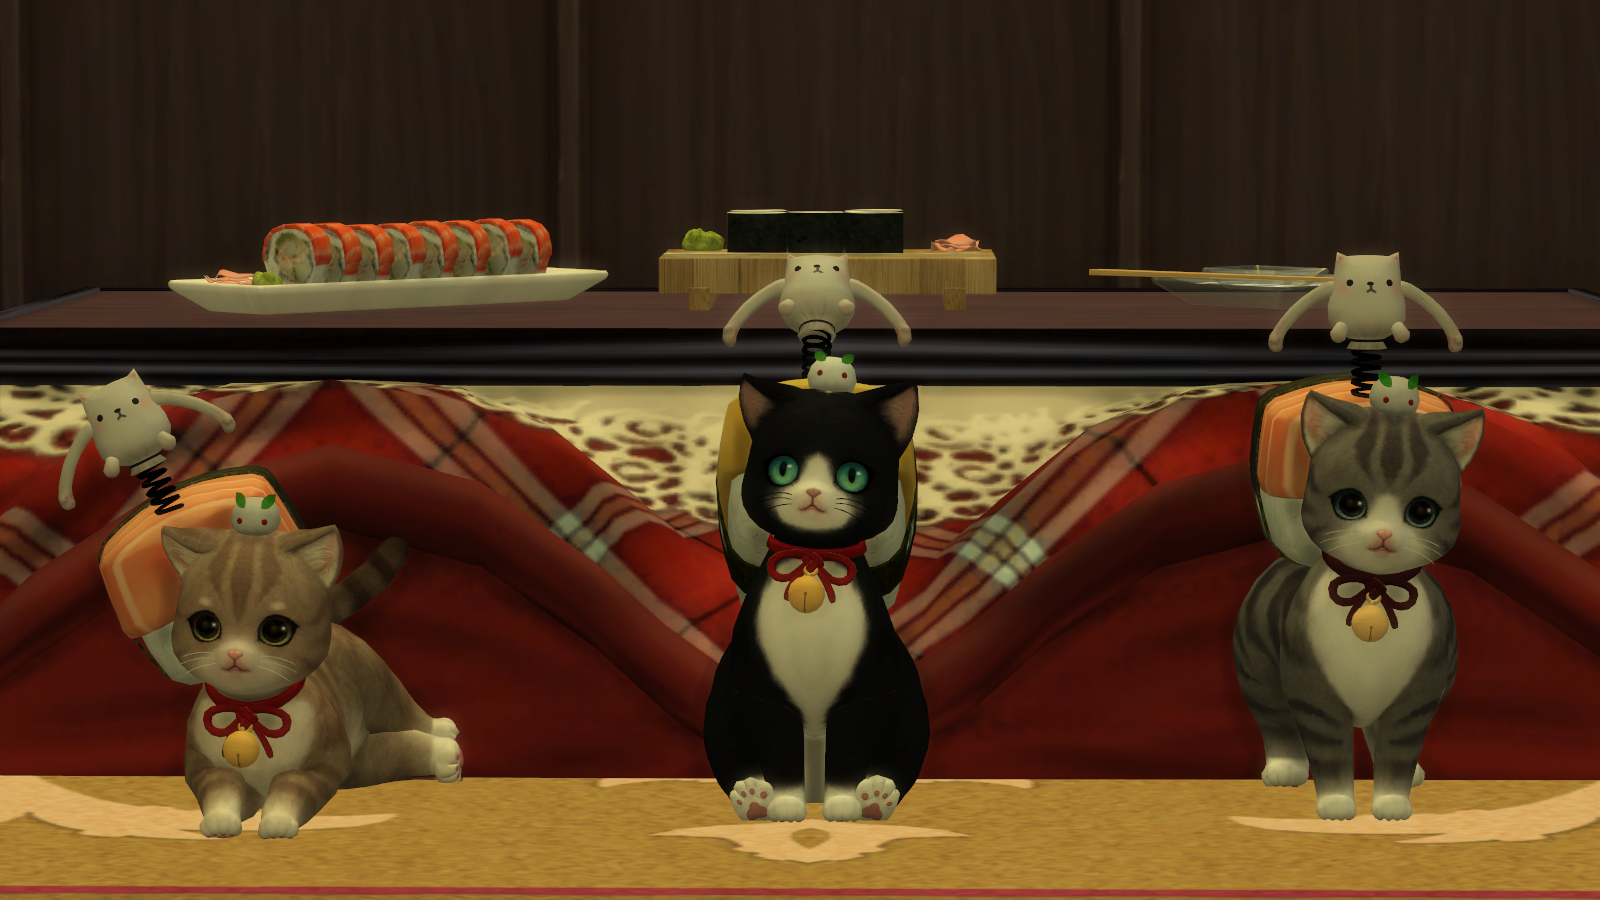 Sushi Cats by Noiranddarksims.